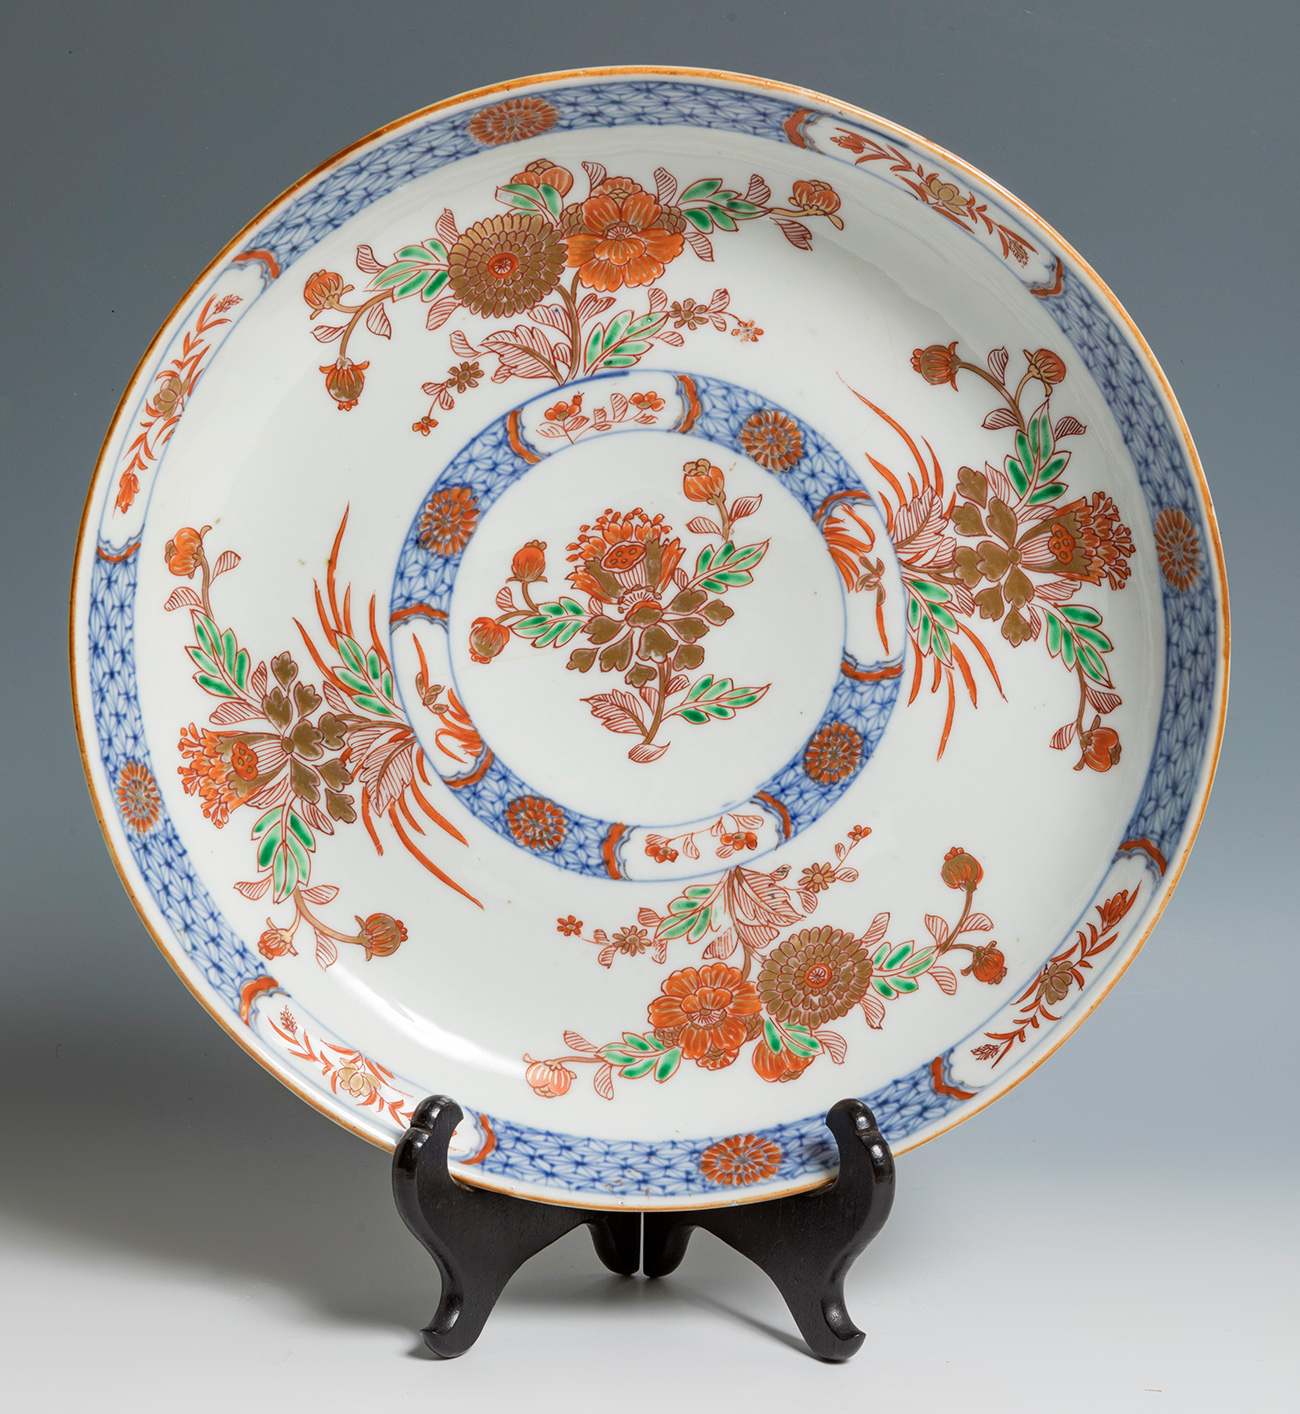 Plate of the East India Company, 19th century.Enamelled porcelain.Measurements: 34 cm (diameter).